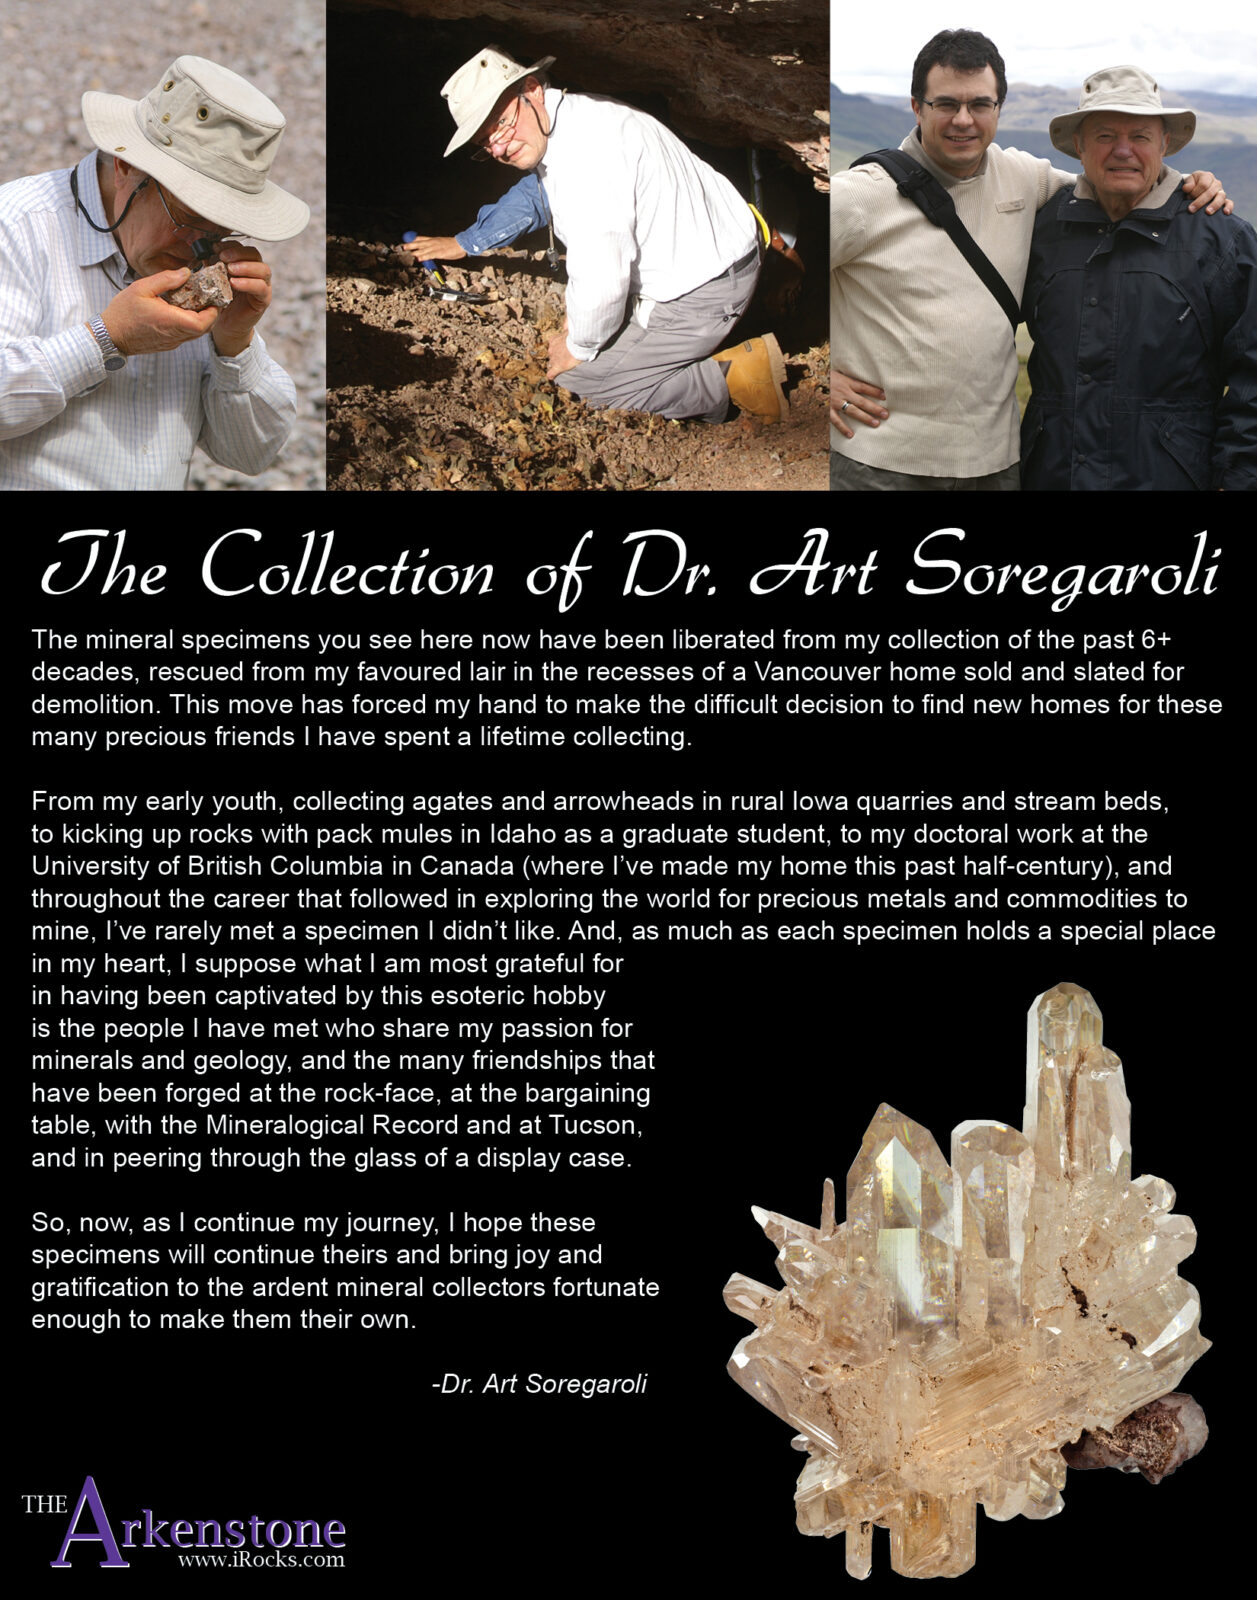 An introduction of Dr. Art Soregaroli's Fine Mineral Collection